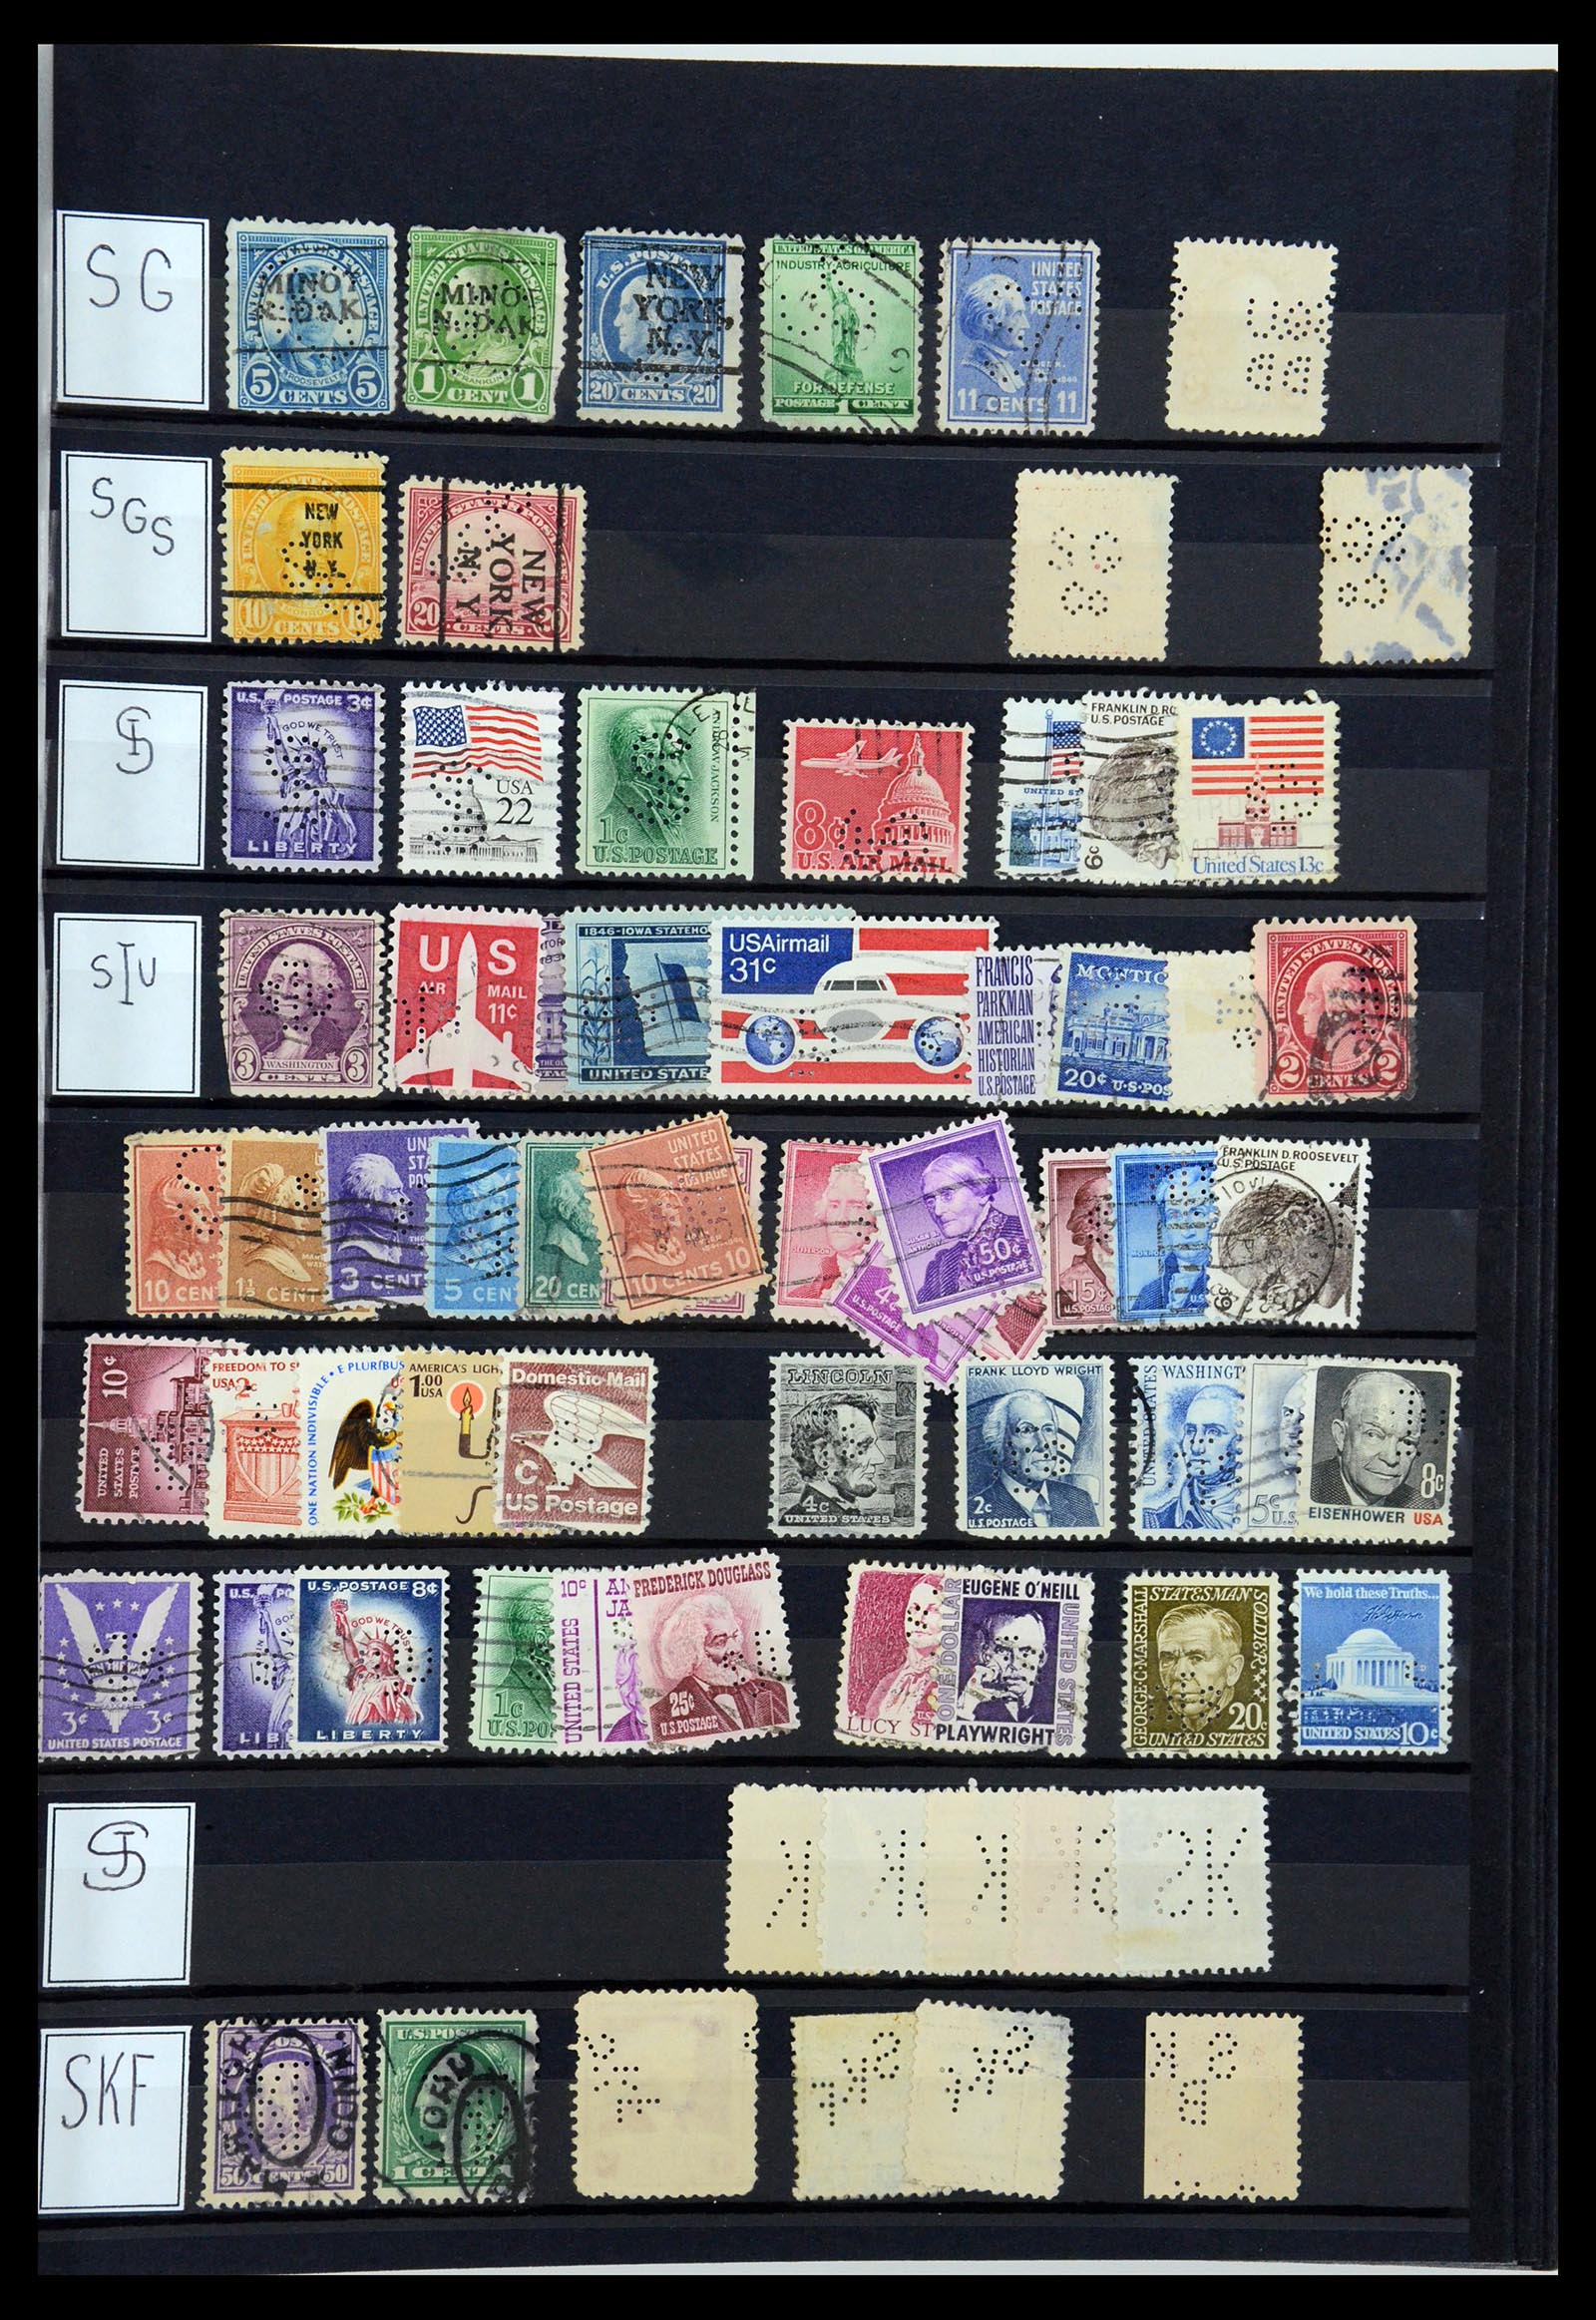 36388 129 - Stamp collection 36388 USA perfins.